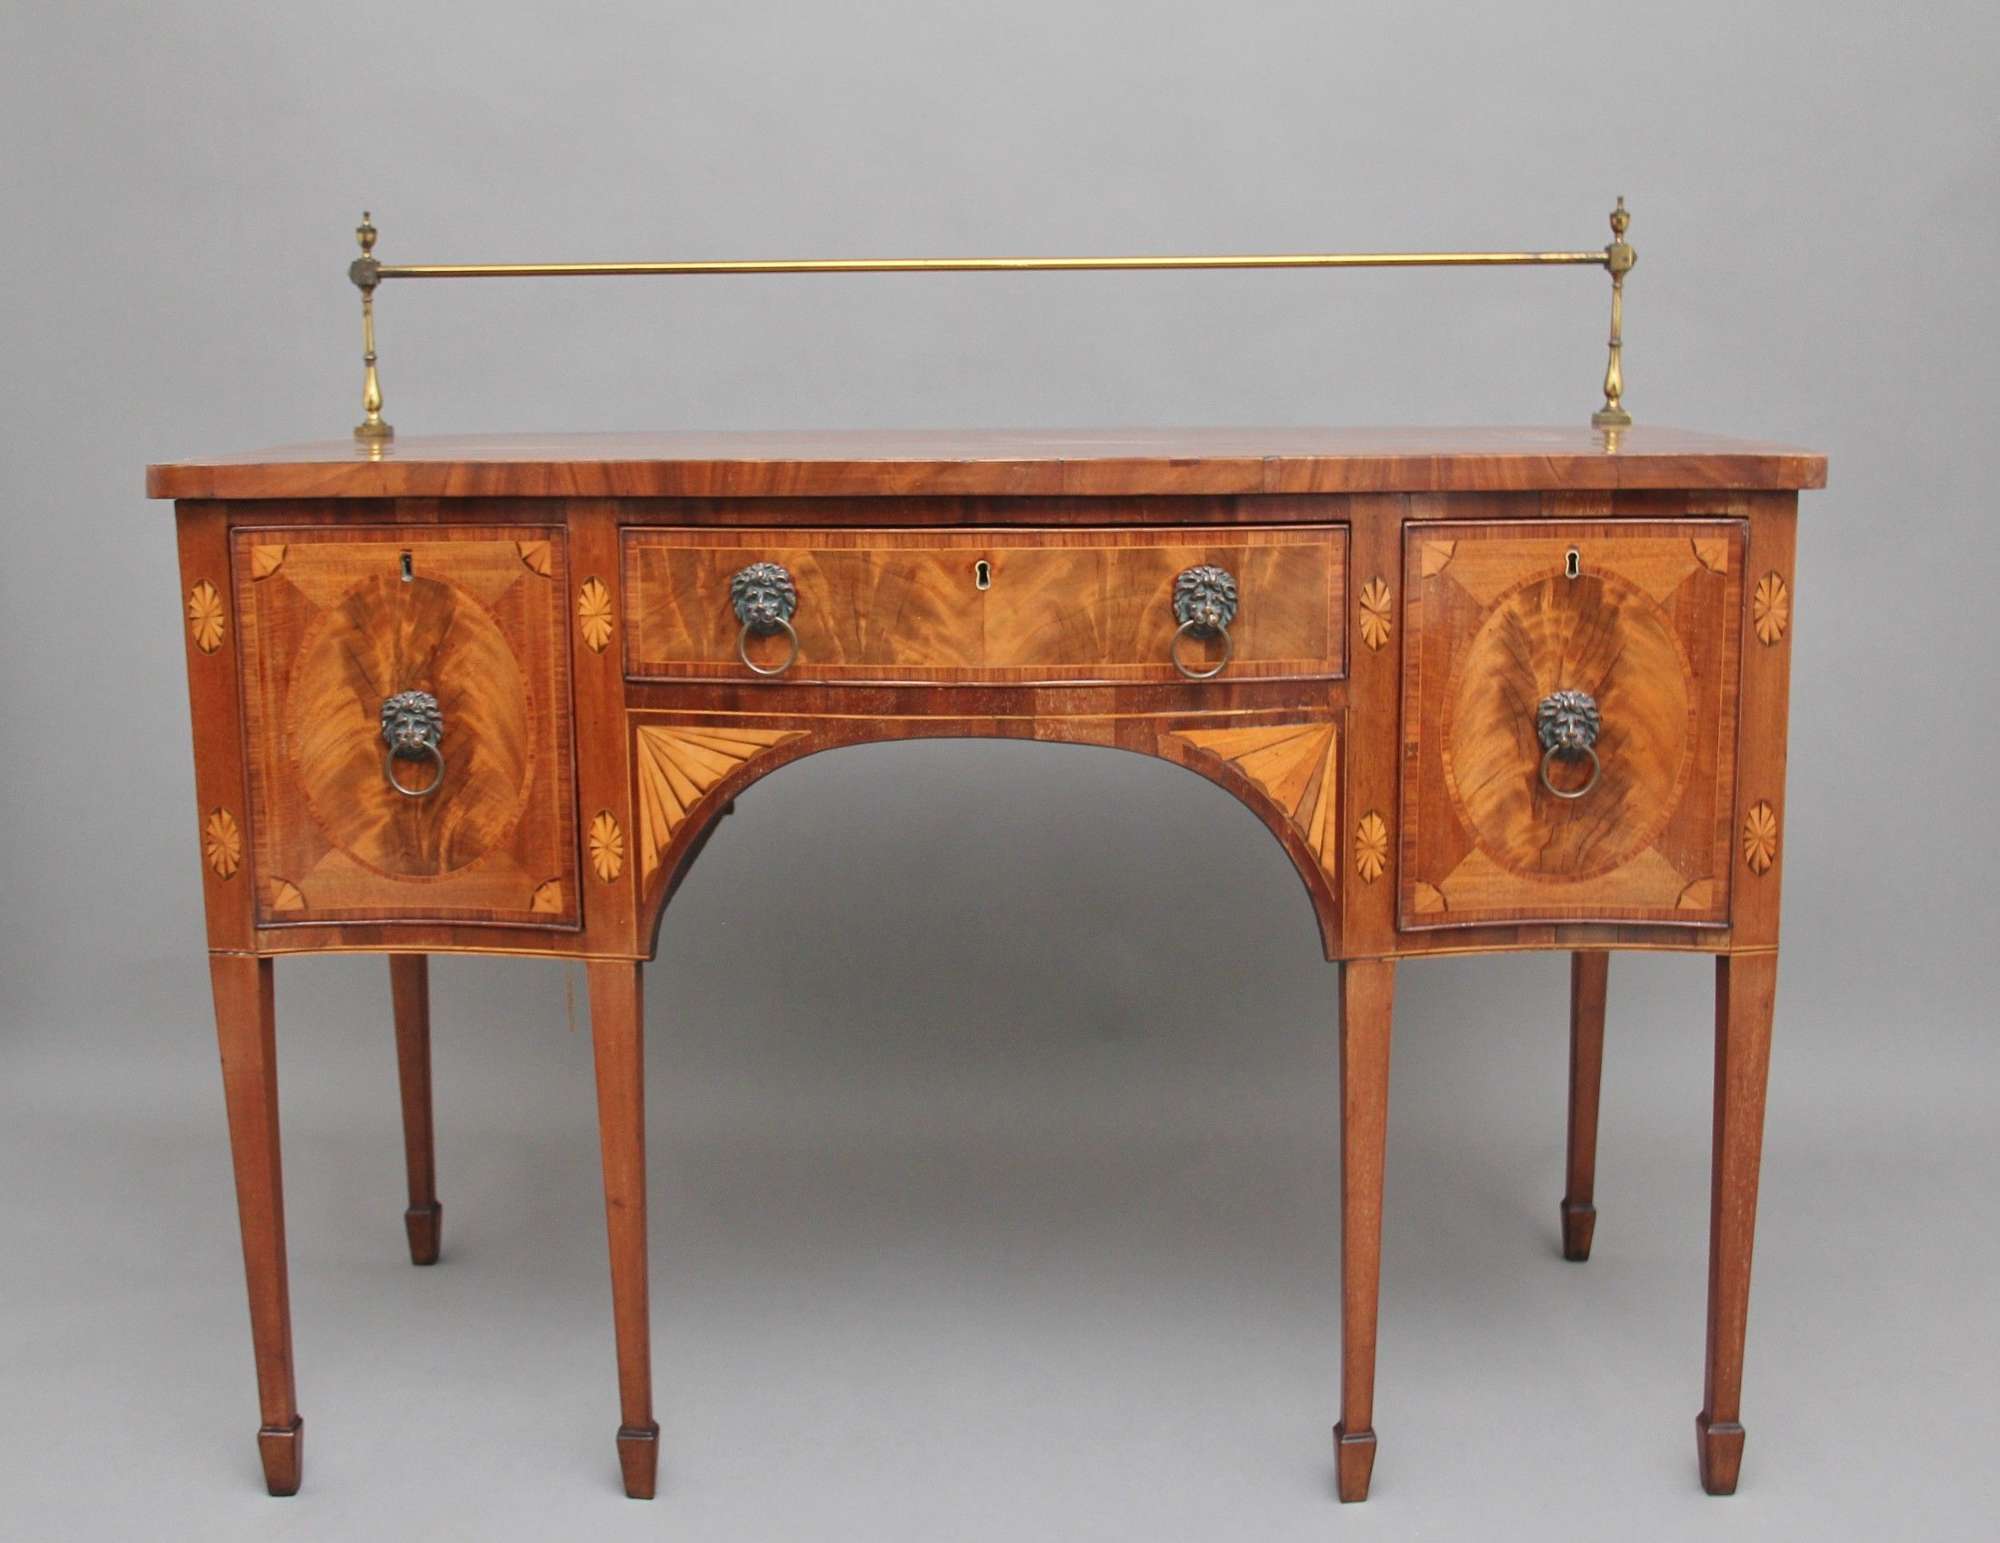 Early 19th Century Mahogany Inlaid Serpentine Antique Sideboard